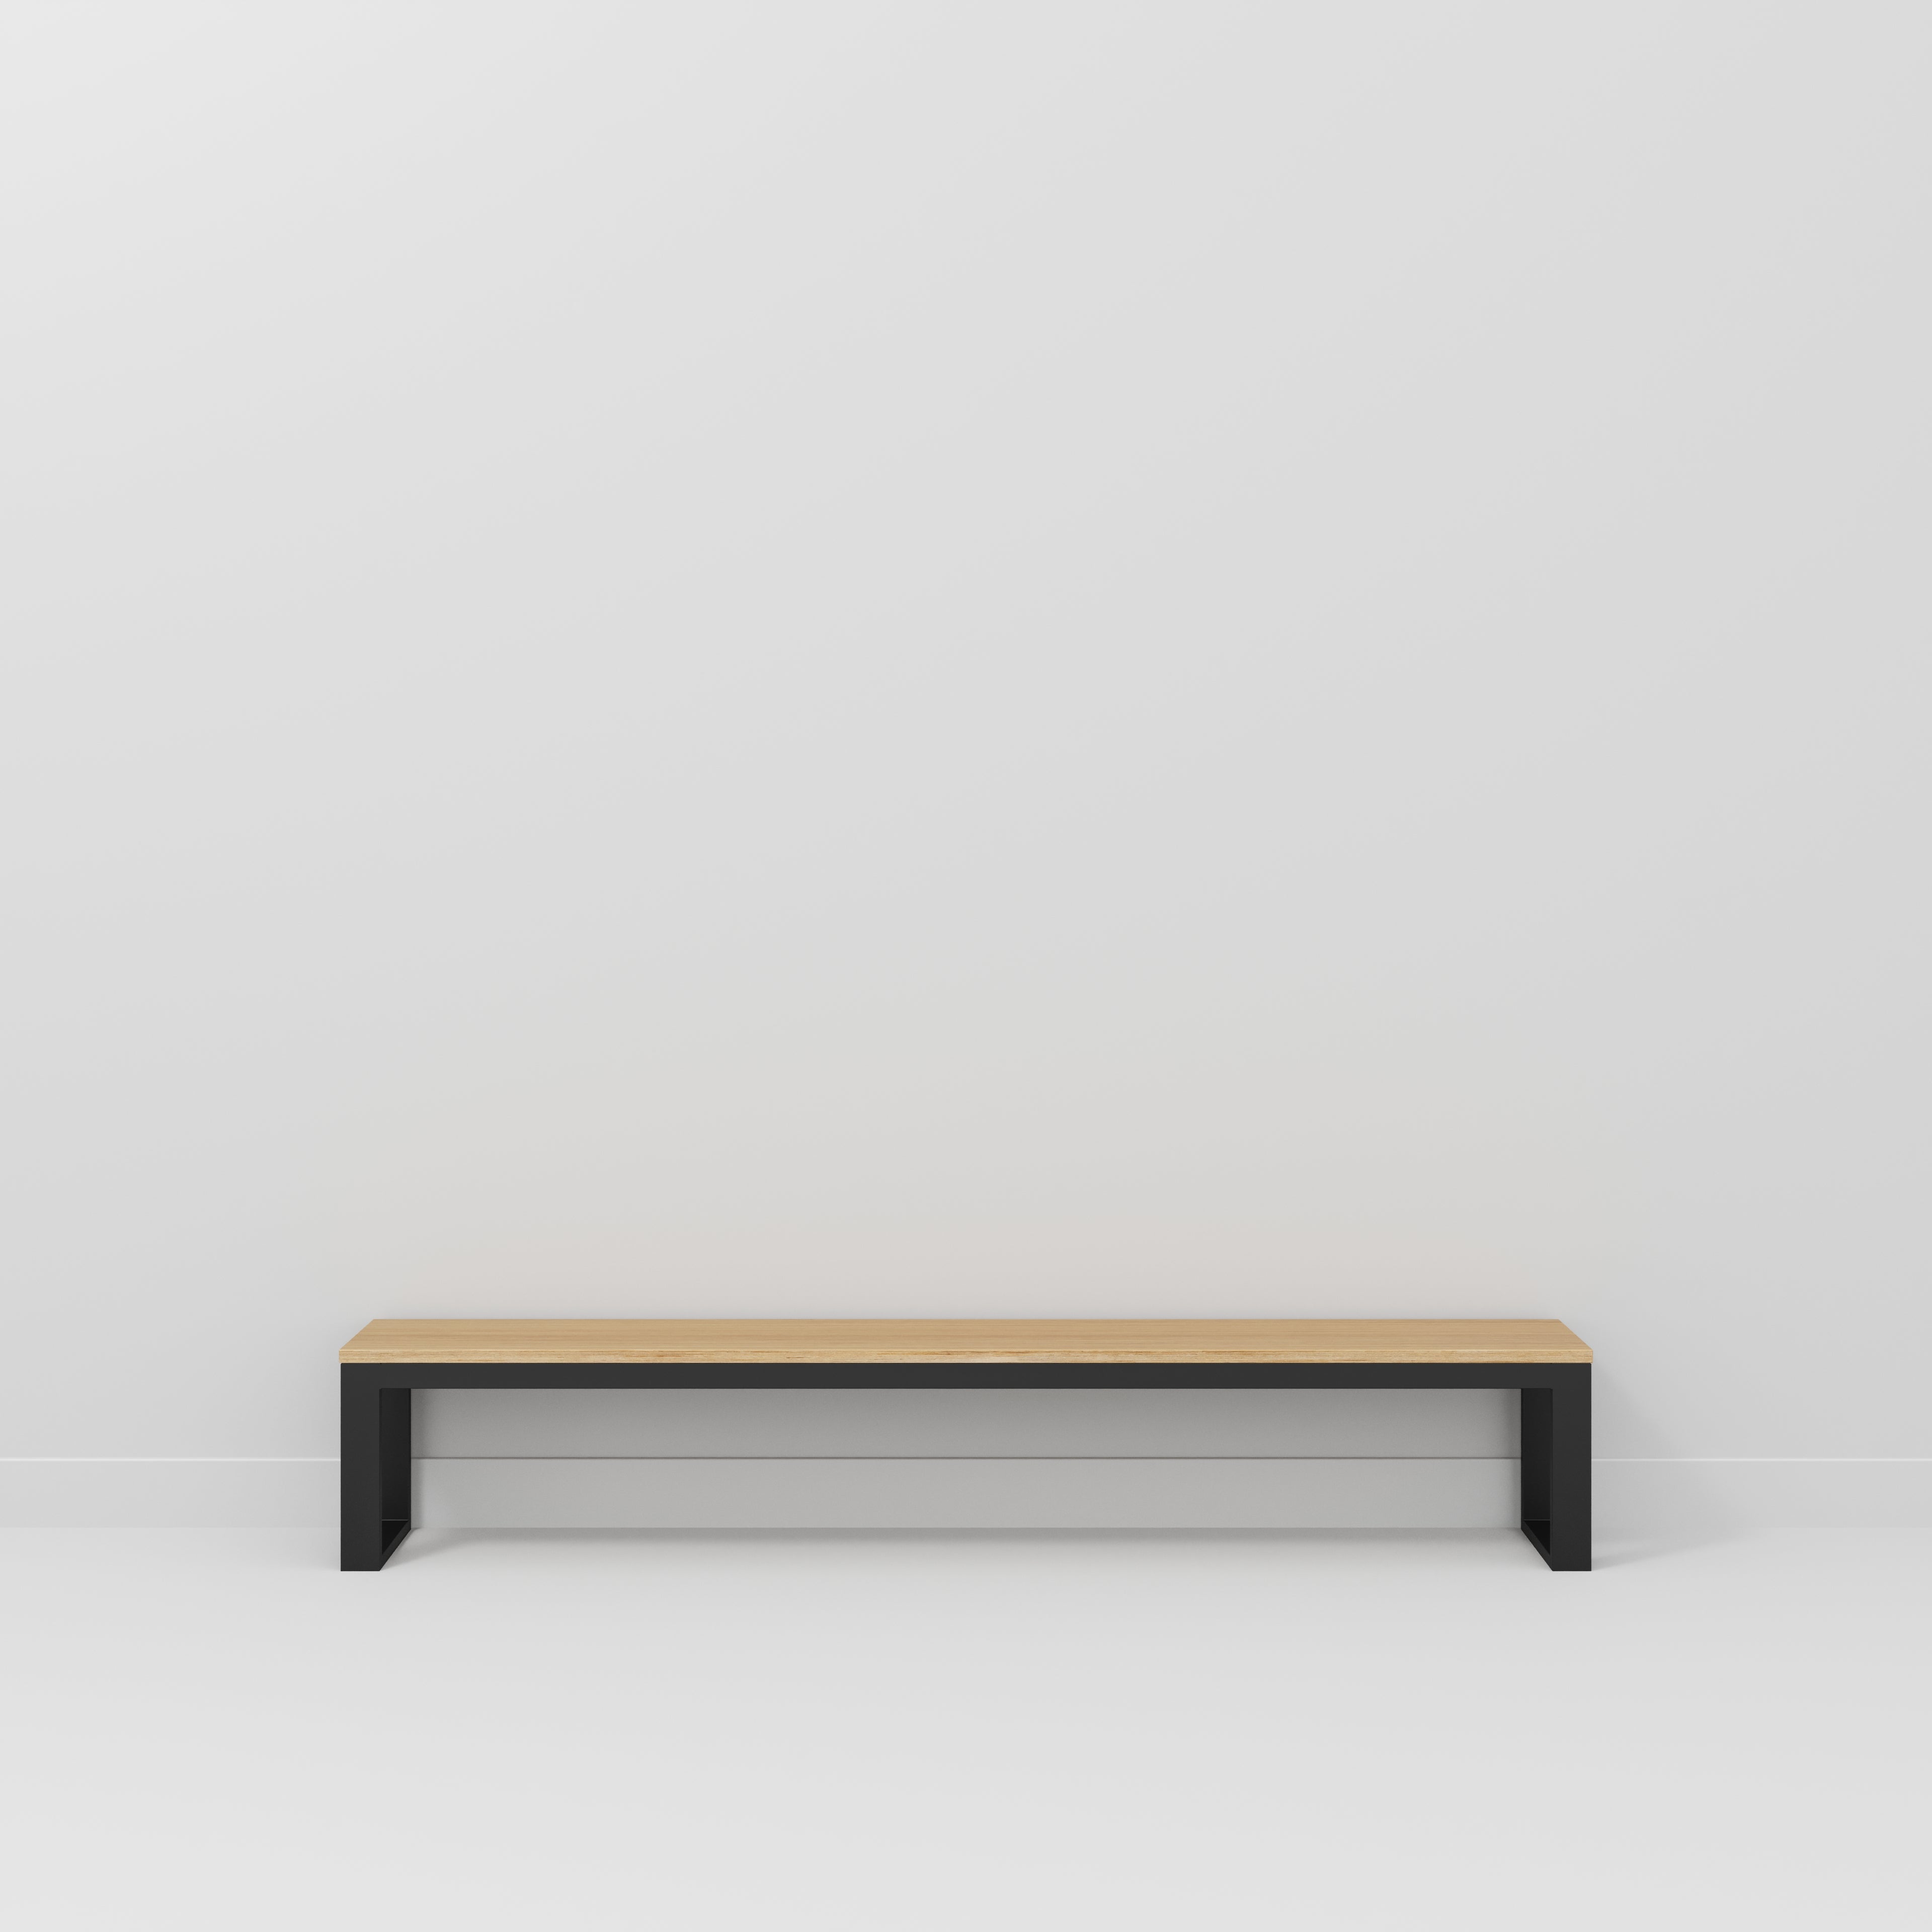 Bench Seat with Black Industrial Frame - Plywood Oak - 2400(w) x 325(d)